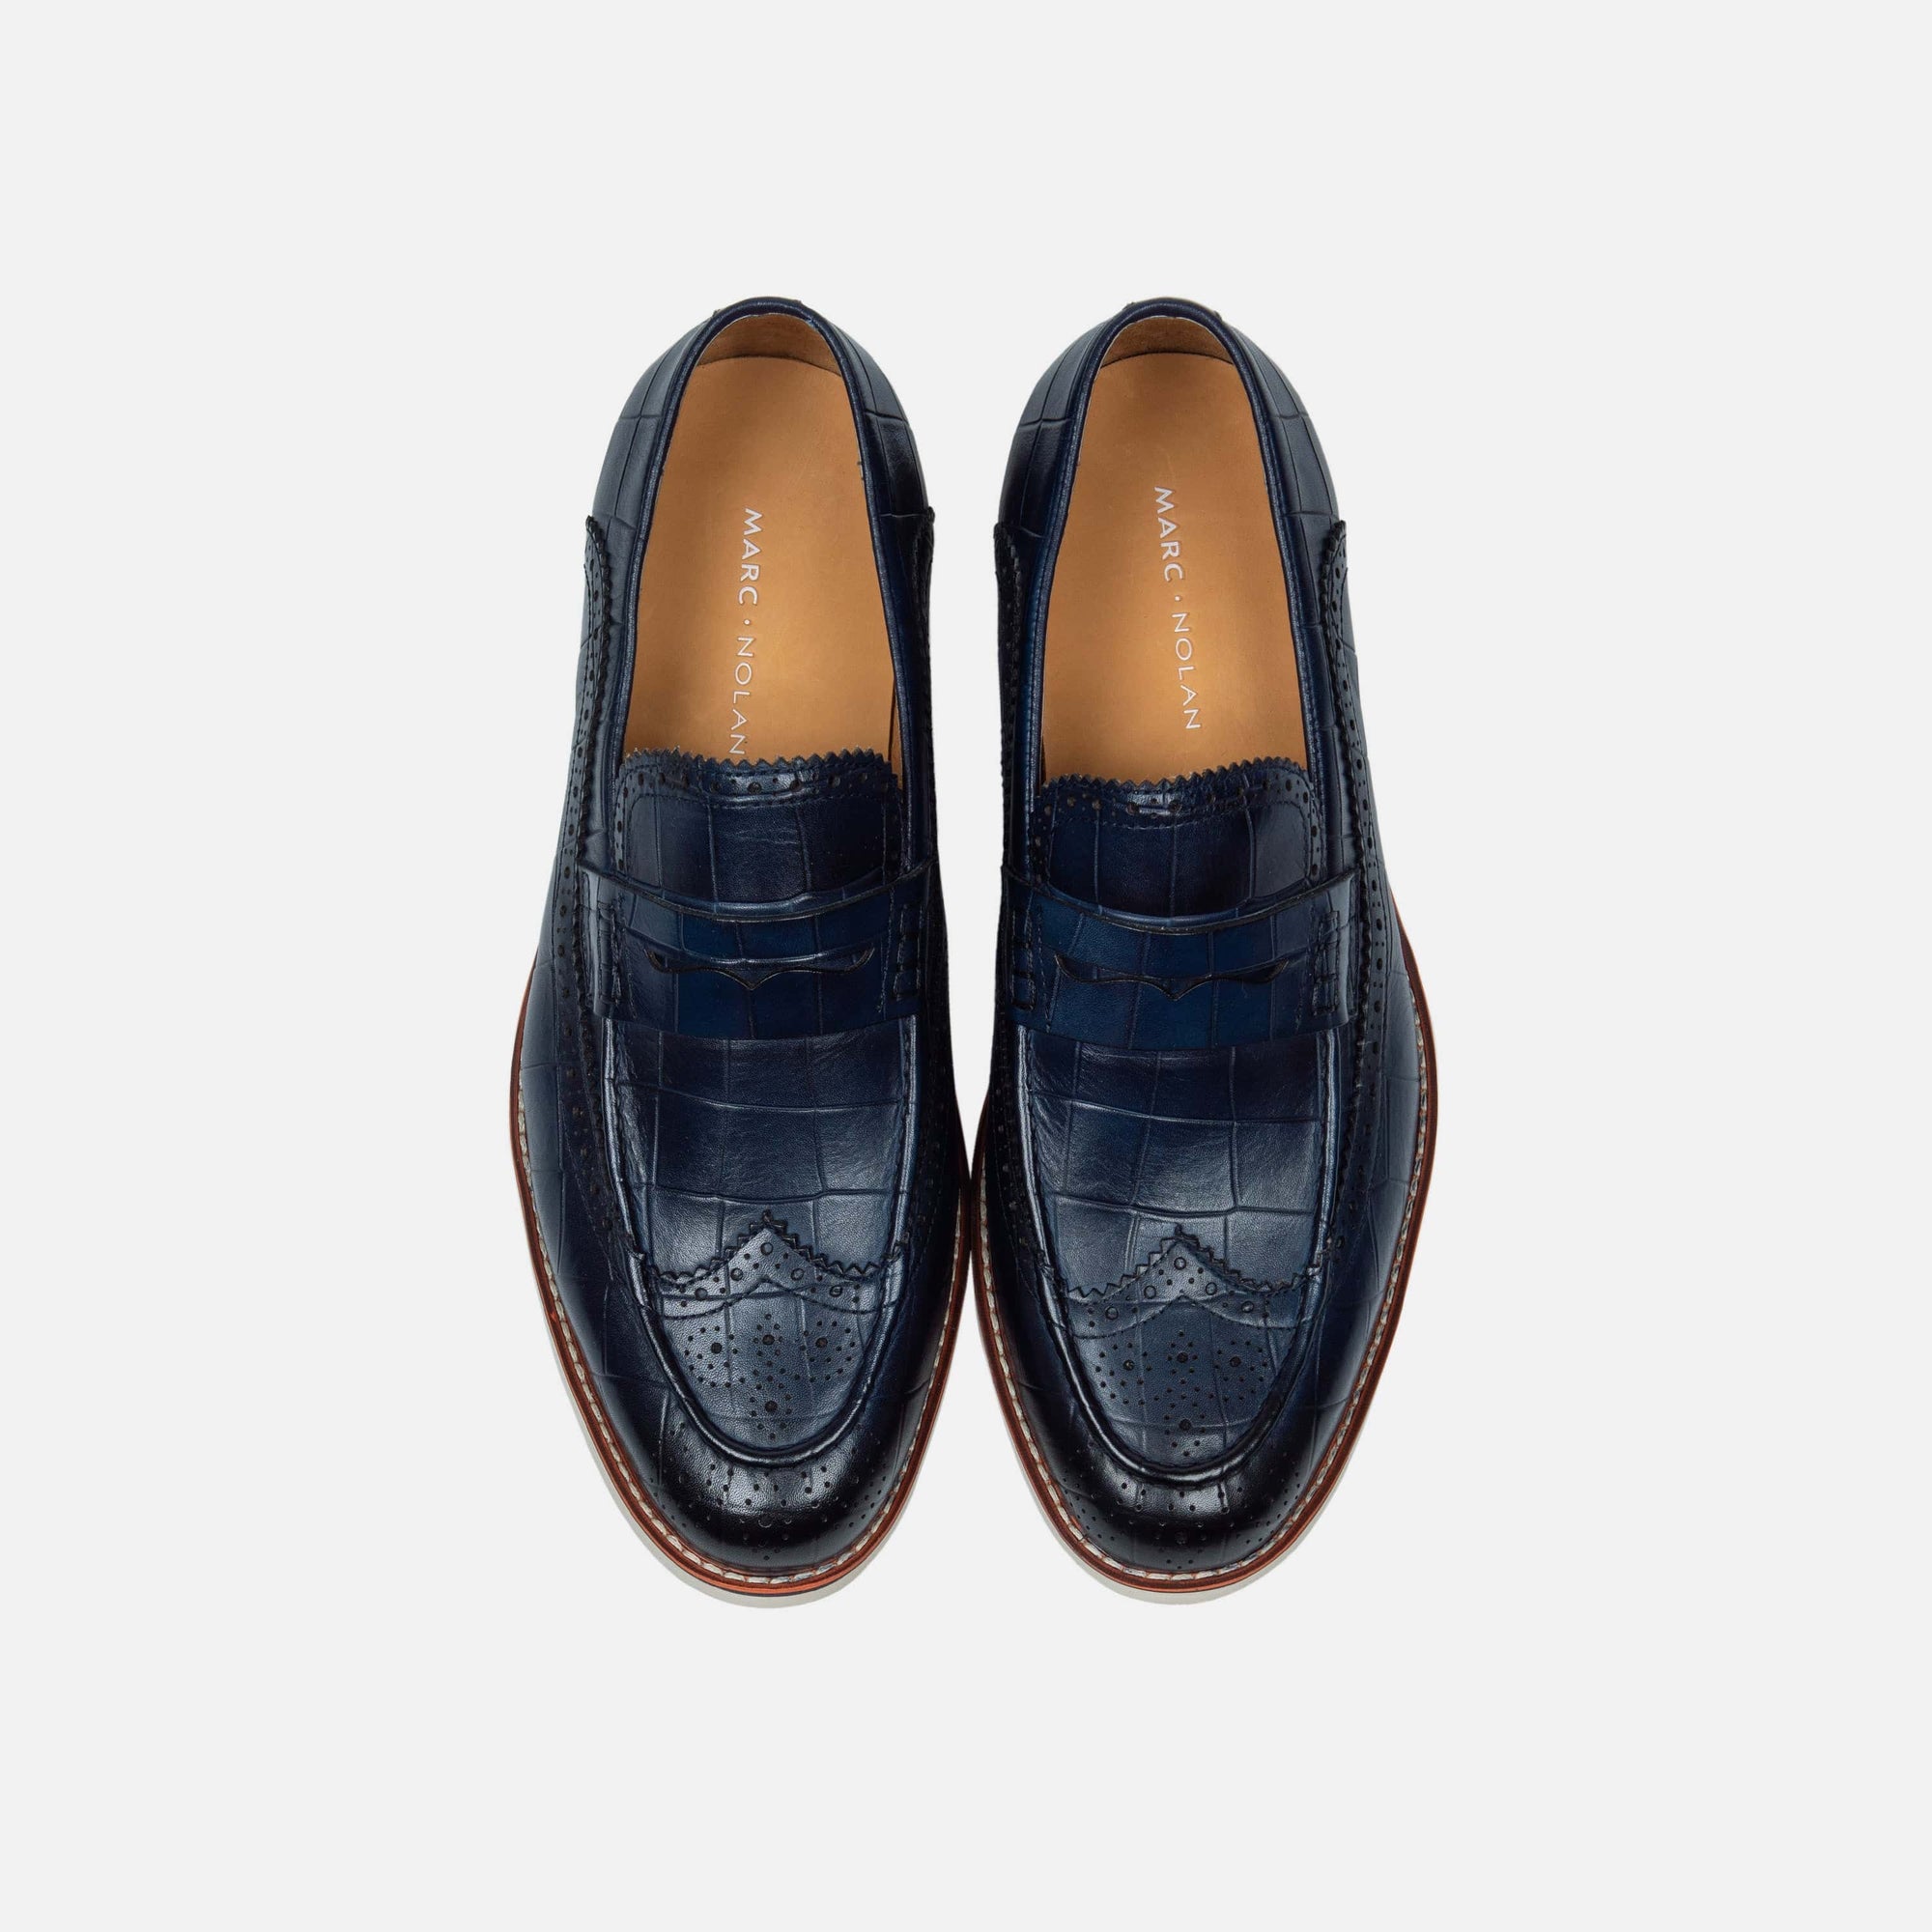 Branson Royal Blue Leather Wingtip Penny Loafer